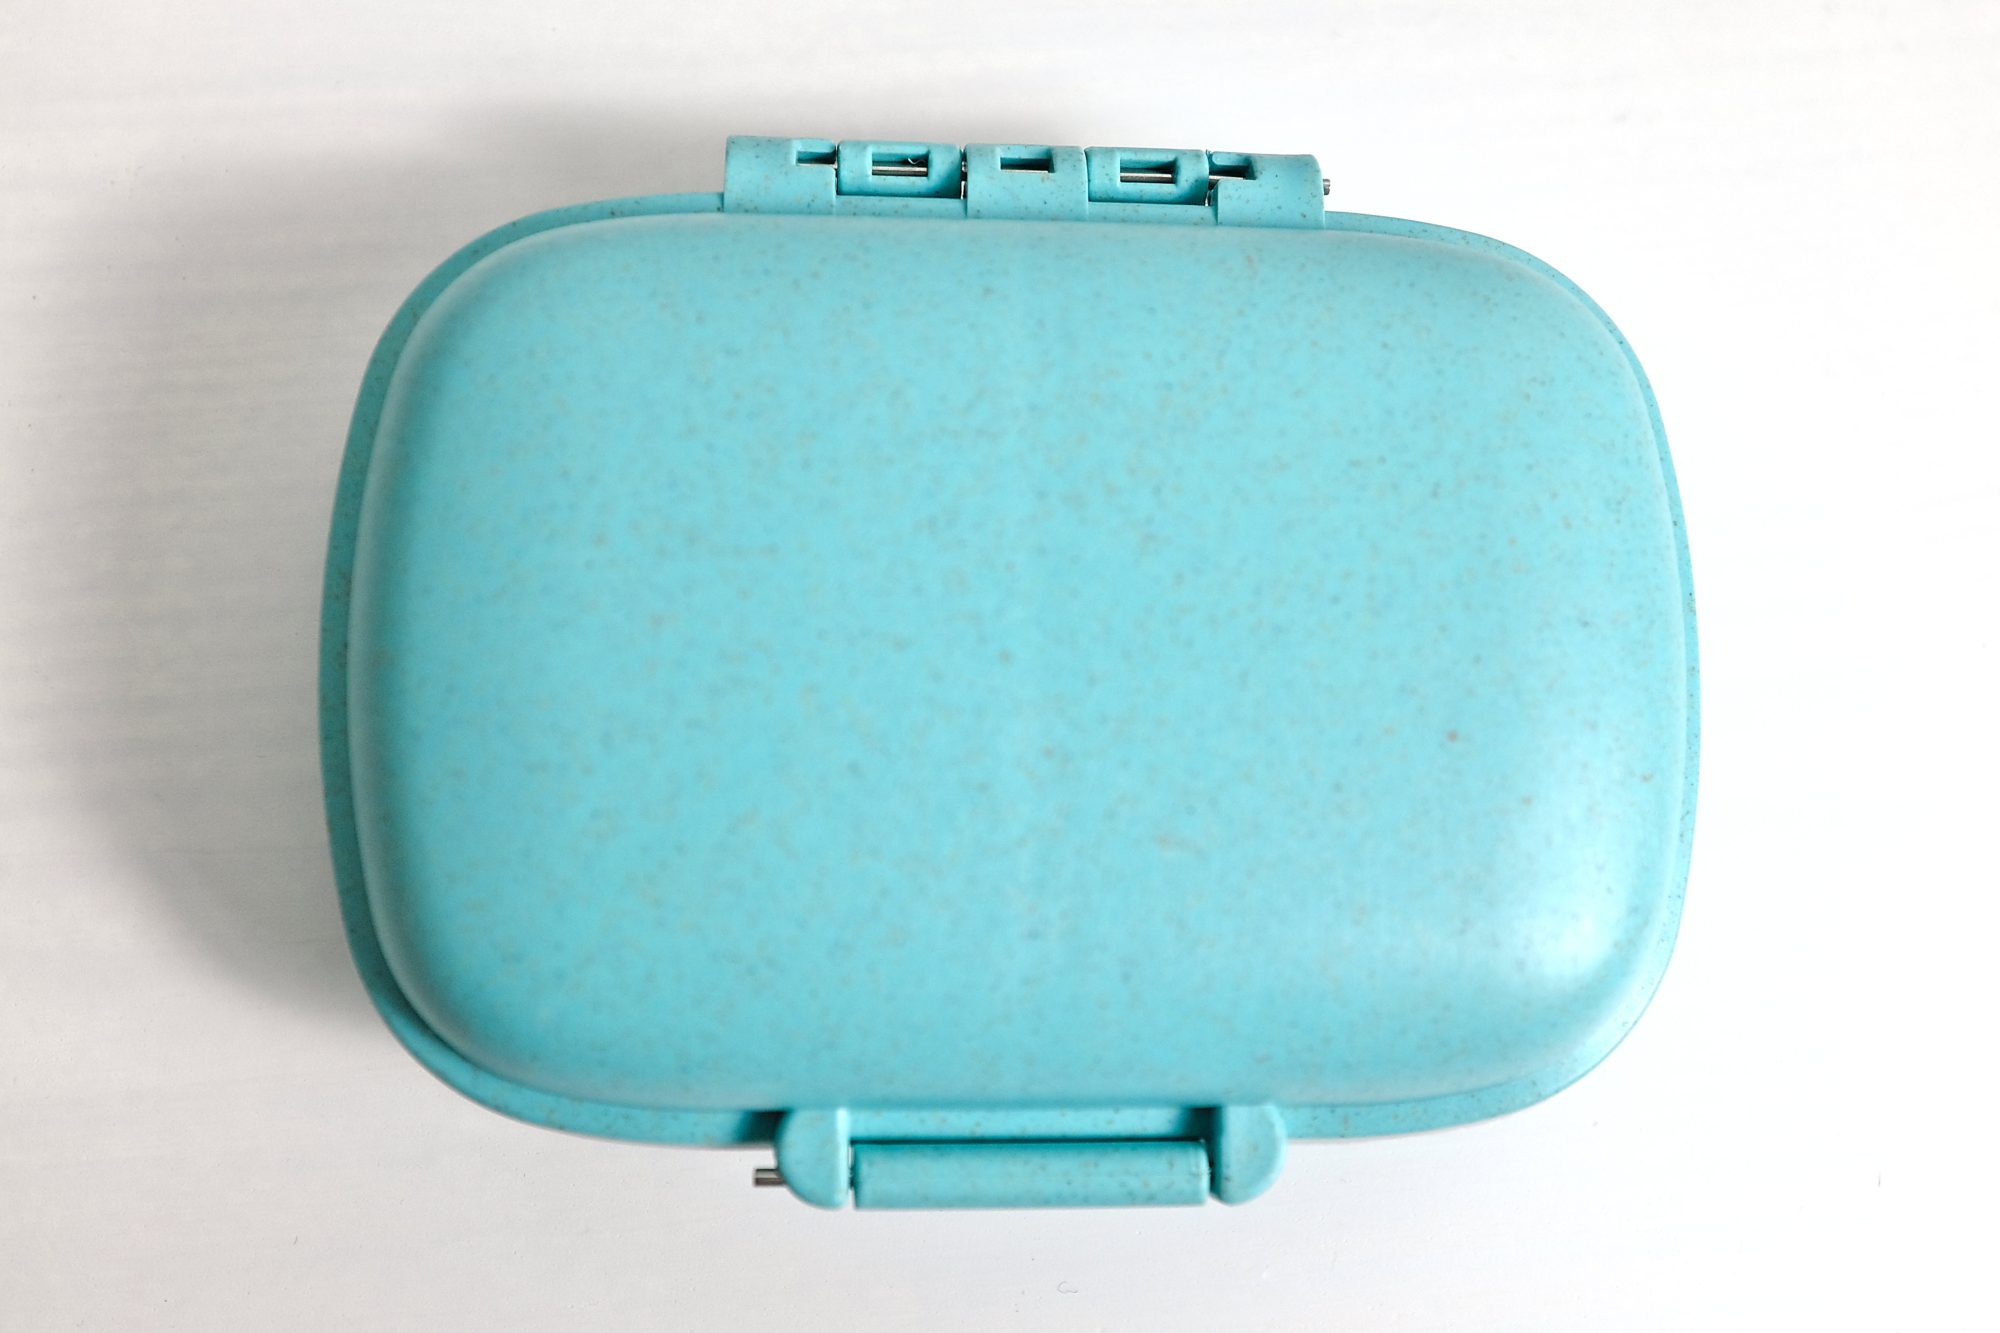 JUST LANDED: Our NEW Vintage - Tupperware U.S. & Canada